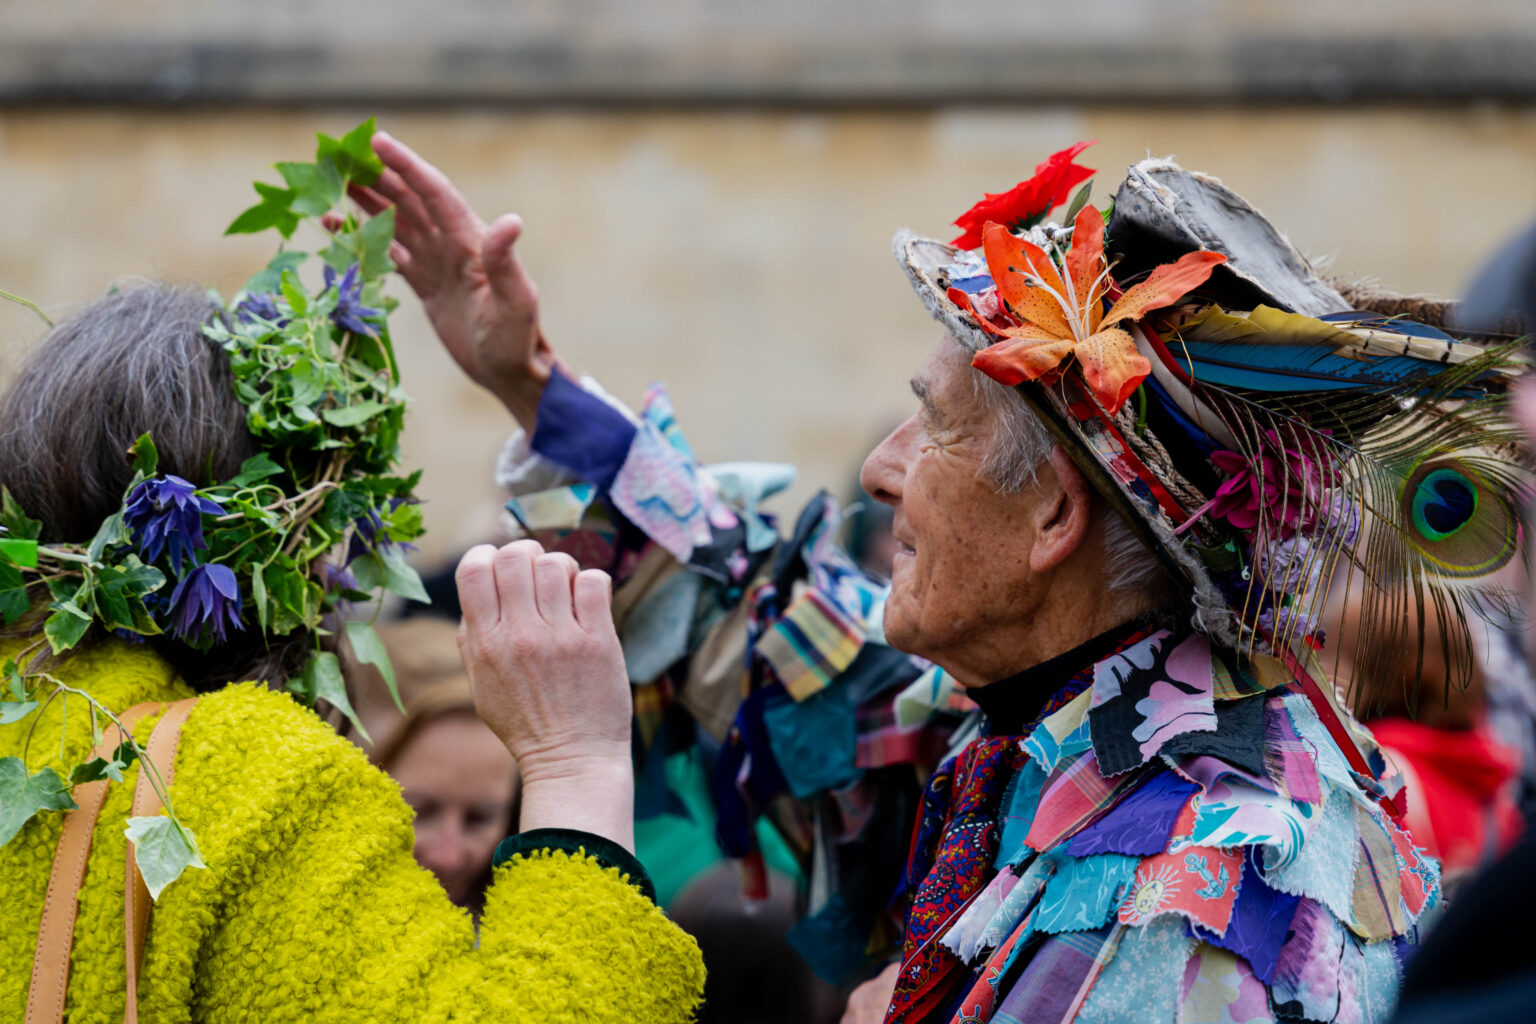 A7R02464 - 2023 - High Street - Oxford - High Res - May Morning Celebration - Web Hero